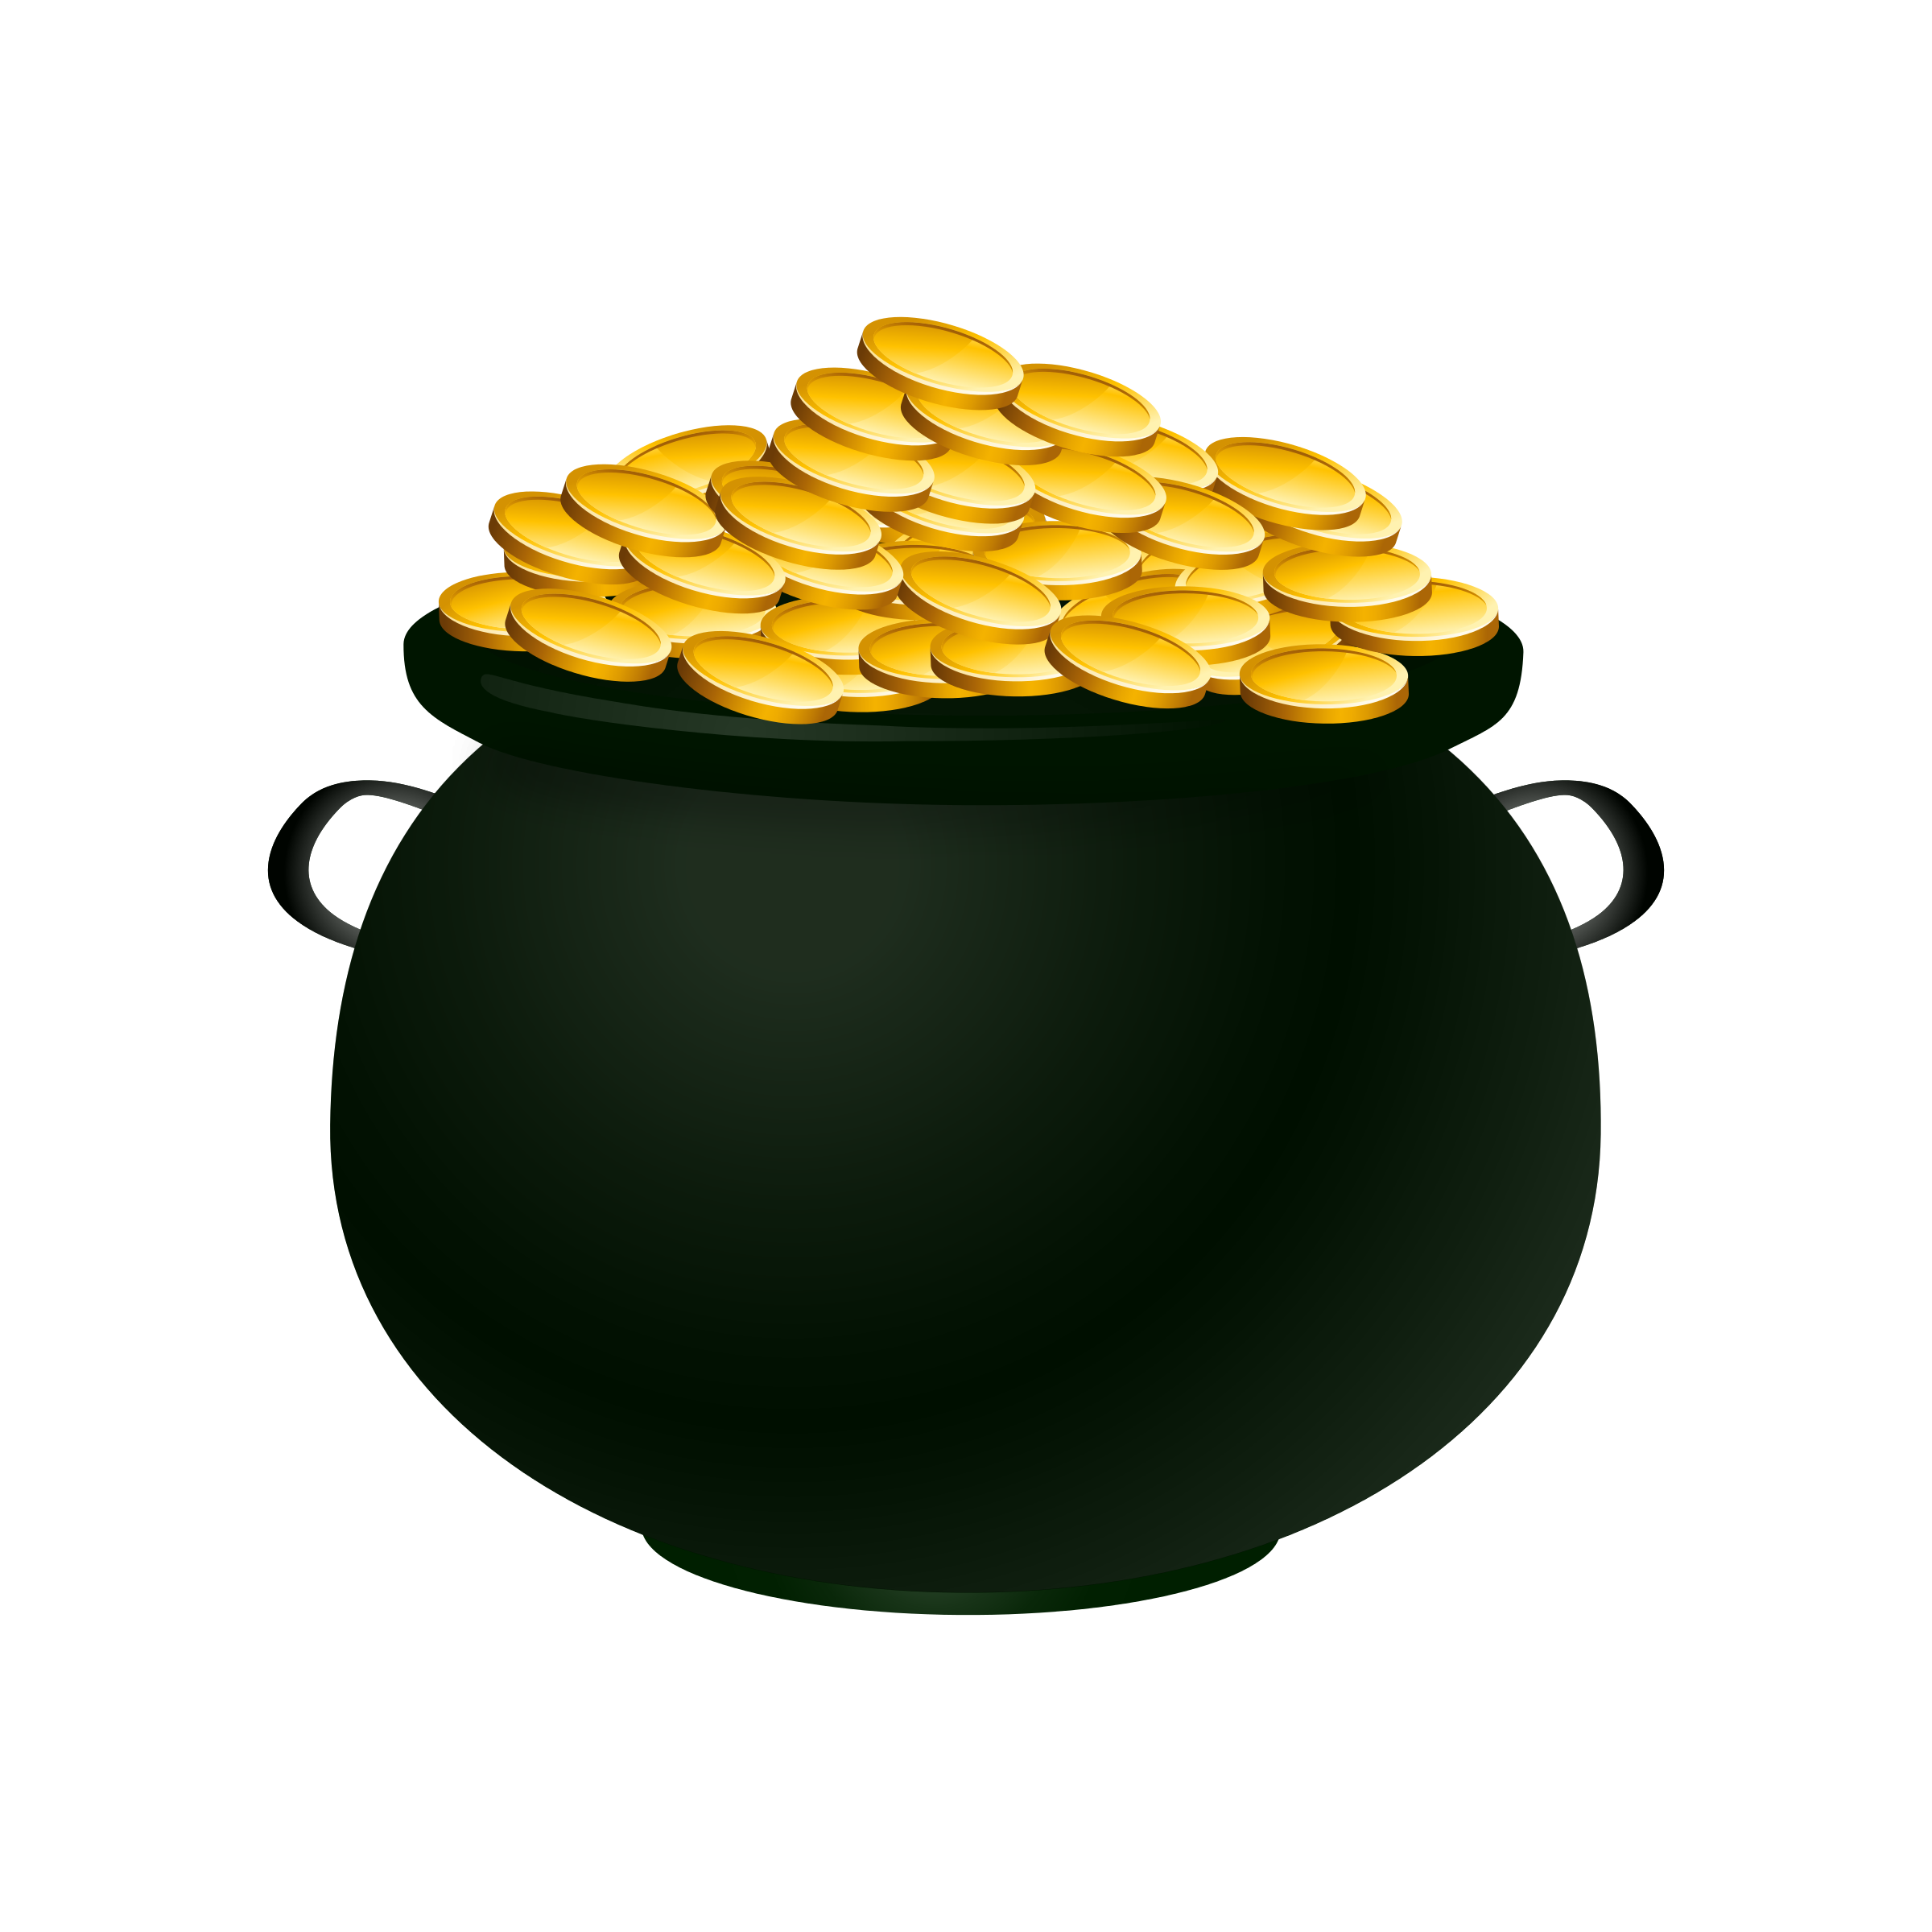 gold-pixabay-clip-art-picture-of-a-pot-of-gold-png-download-2400